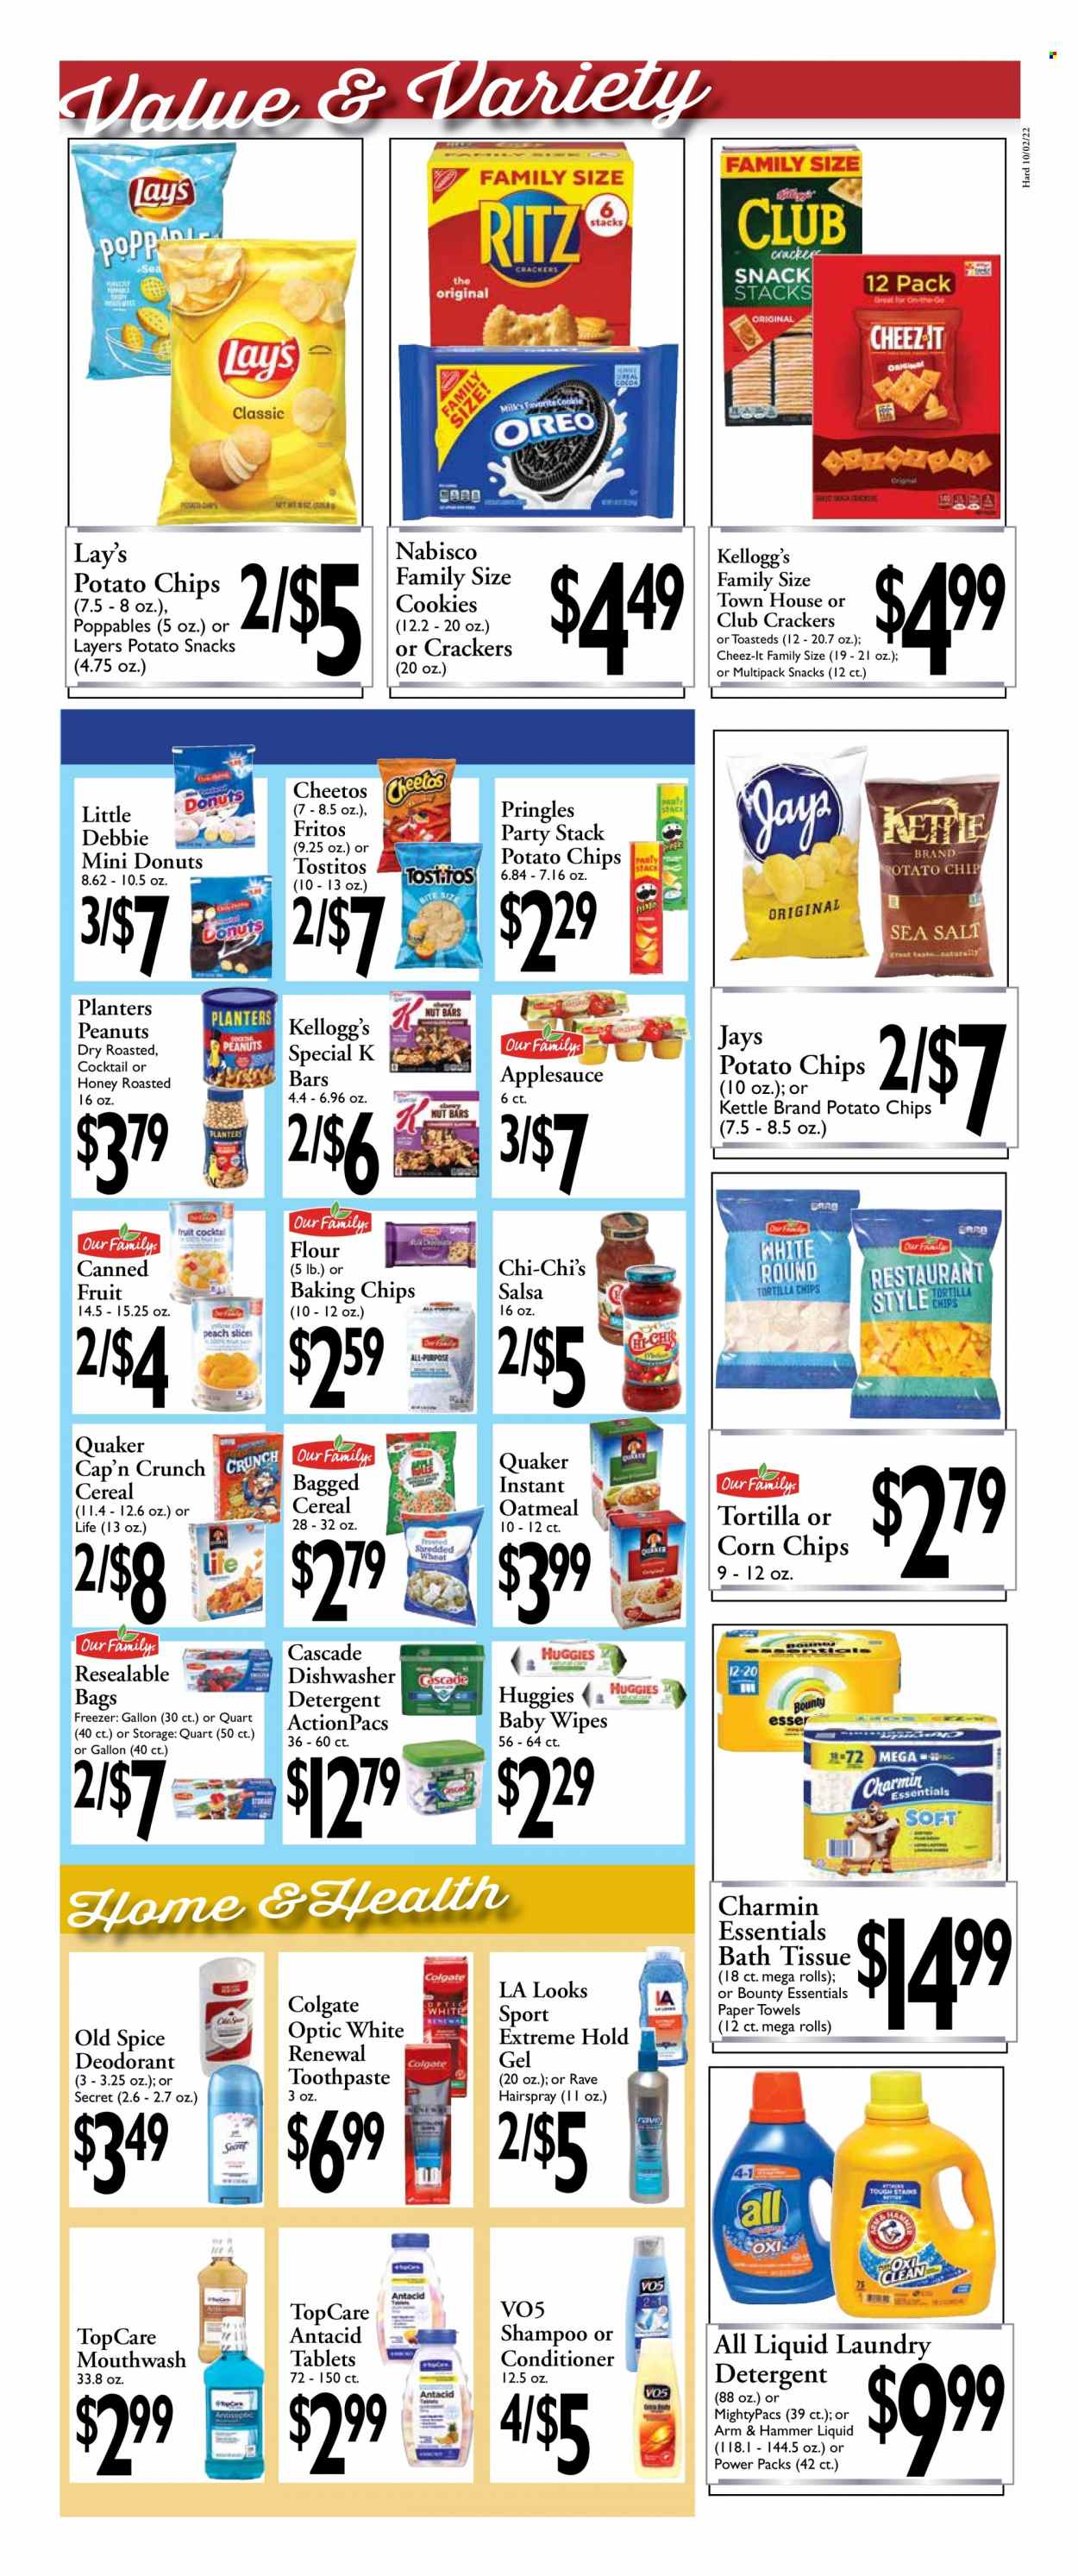 thumbnail - Harding's Markets Flyer - 10/02/2022 - 10/15/2022 - Sales products - tortillas, donut, Quaker, cookies, snack, Bounty, crackers, Kellogg's, Fritos, potato chips, Pringles, Cheetos, Lay’s, corn chips, Cheez-It, Tostitos, ARM & HAMMER, oatmeal, baking chips, canned fruit, cereals, Cap'n Crunch, spice, salsa, apple sauce, peanuts, Planters, shampoo, Old Spice, conditioner, VO5, Antacid. Page 5.